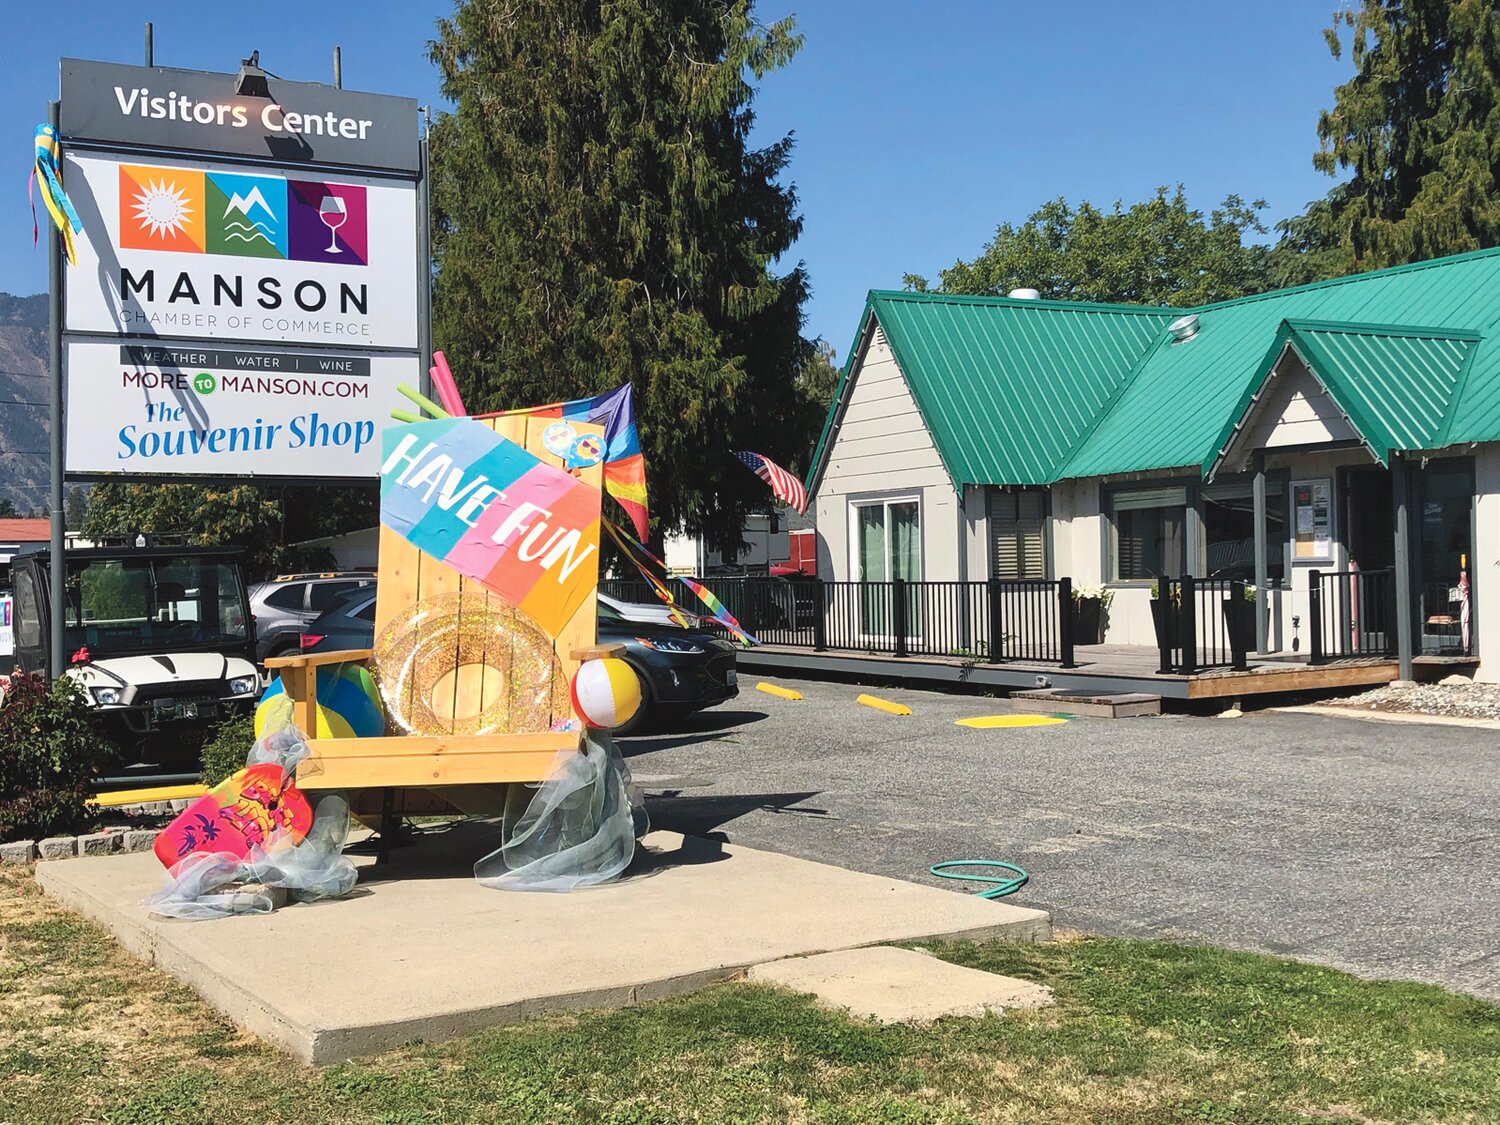 The Manson Chamber of Commerce is now located at 17 Hale Street in Manson and invites those visiting the area to take a photo in their giant beach chair in front of the office.
KATIE LINDERT/WARD MEDIA